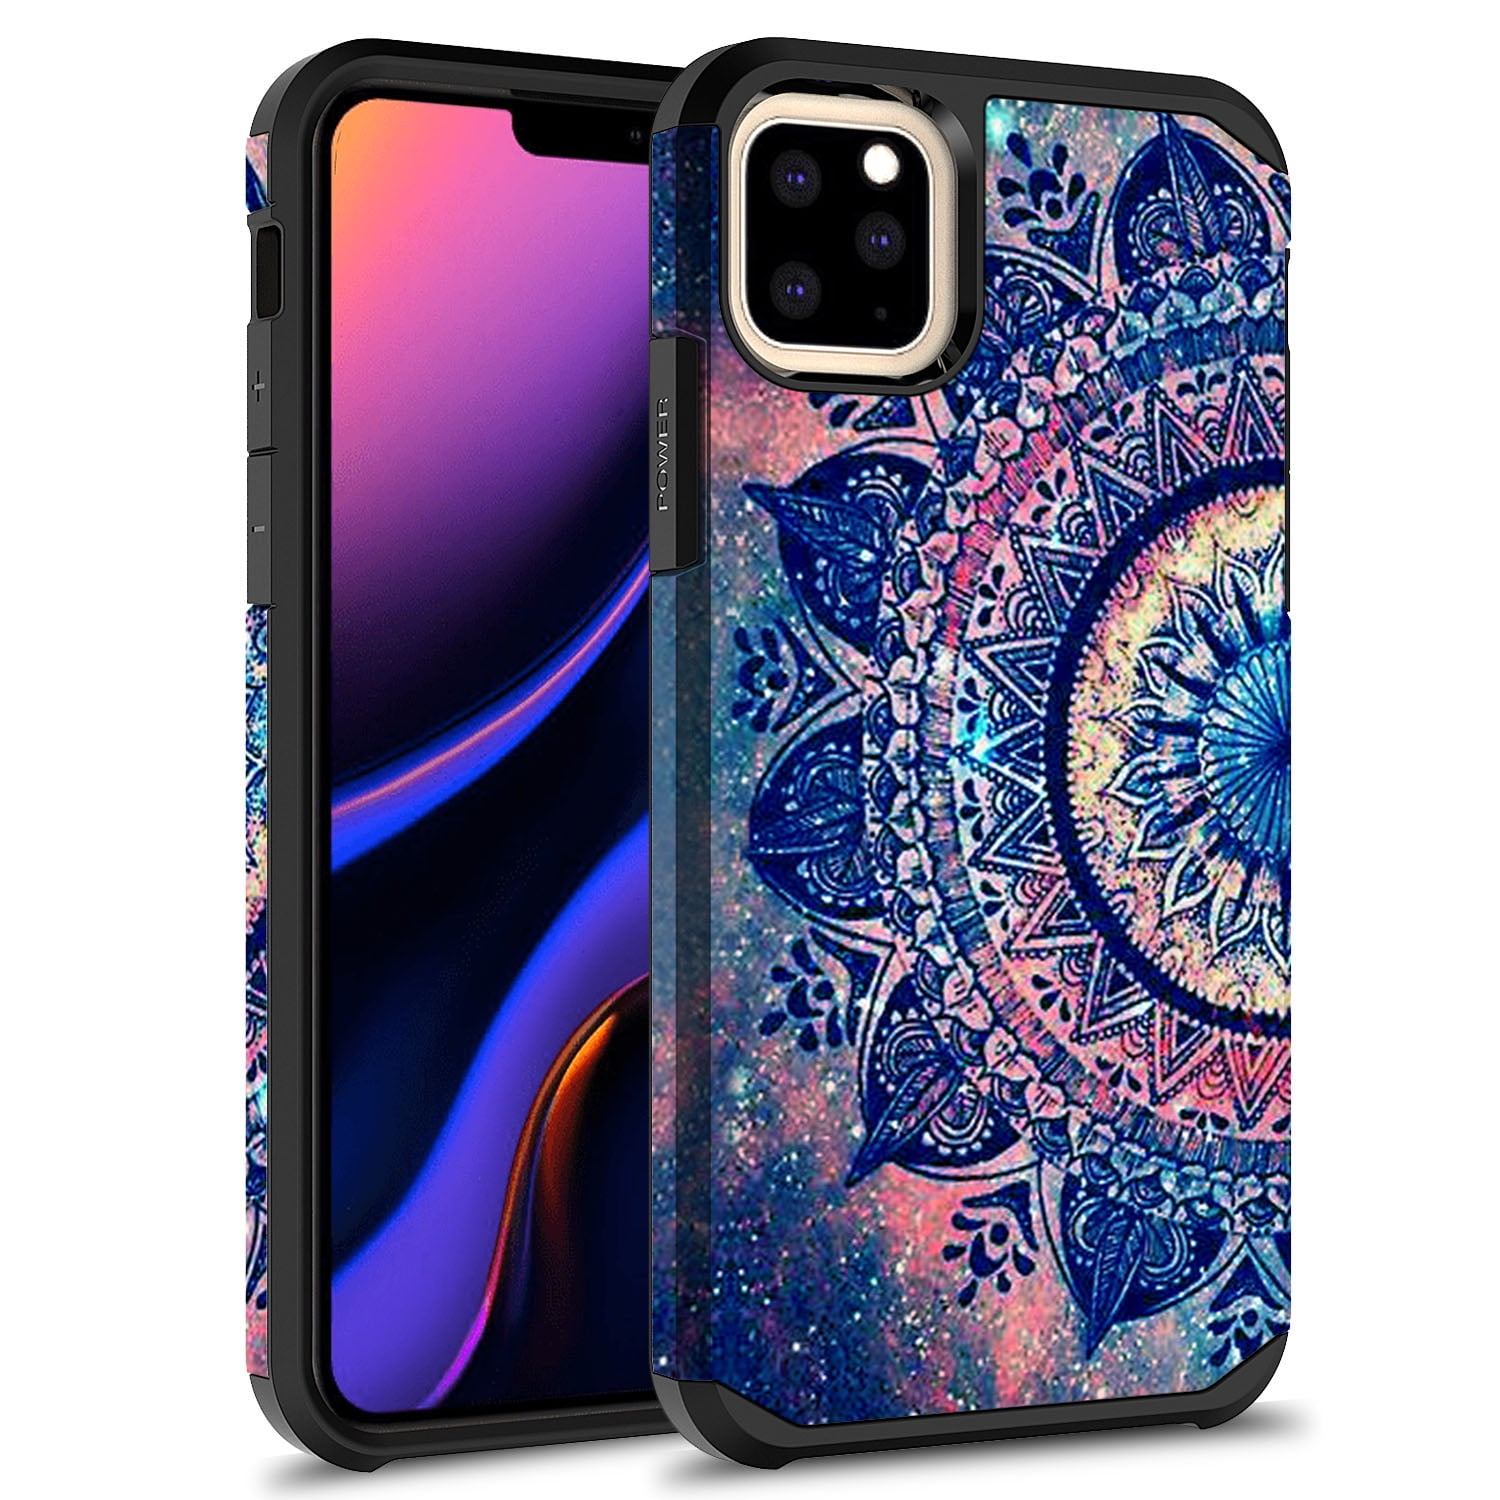 Sugar Skull iPhone 11 Case with Grip Ring Holder Multi-Function Cover Slim Soft and Hard Tire Shockproof Protective Phone Case Slim Hybrid Shockproof Case for iPhone 11 